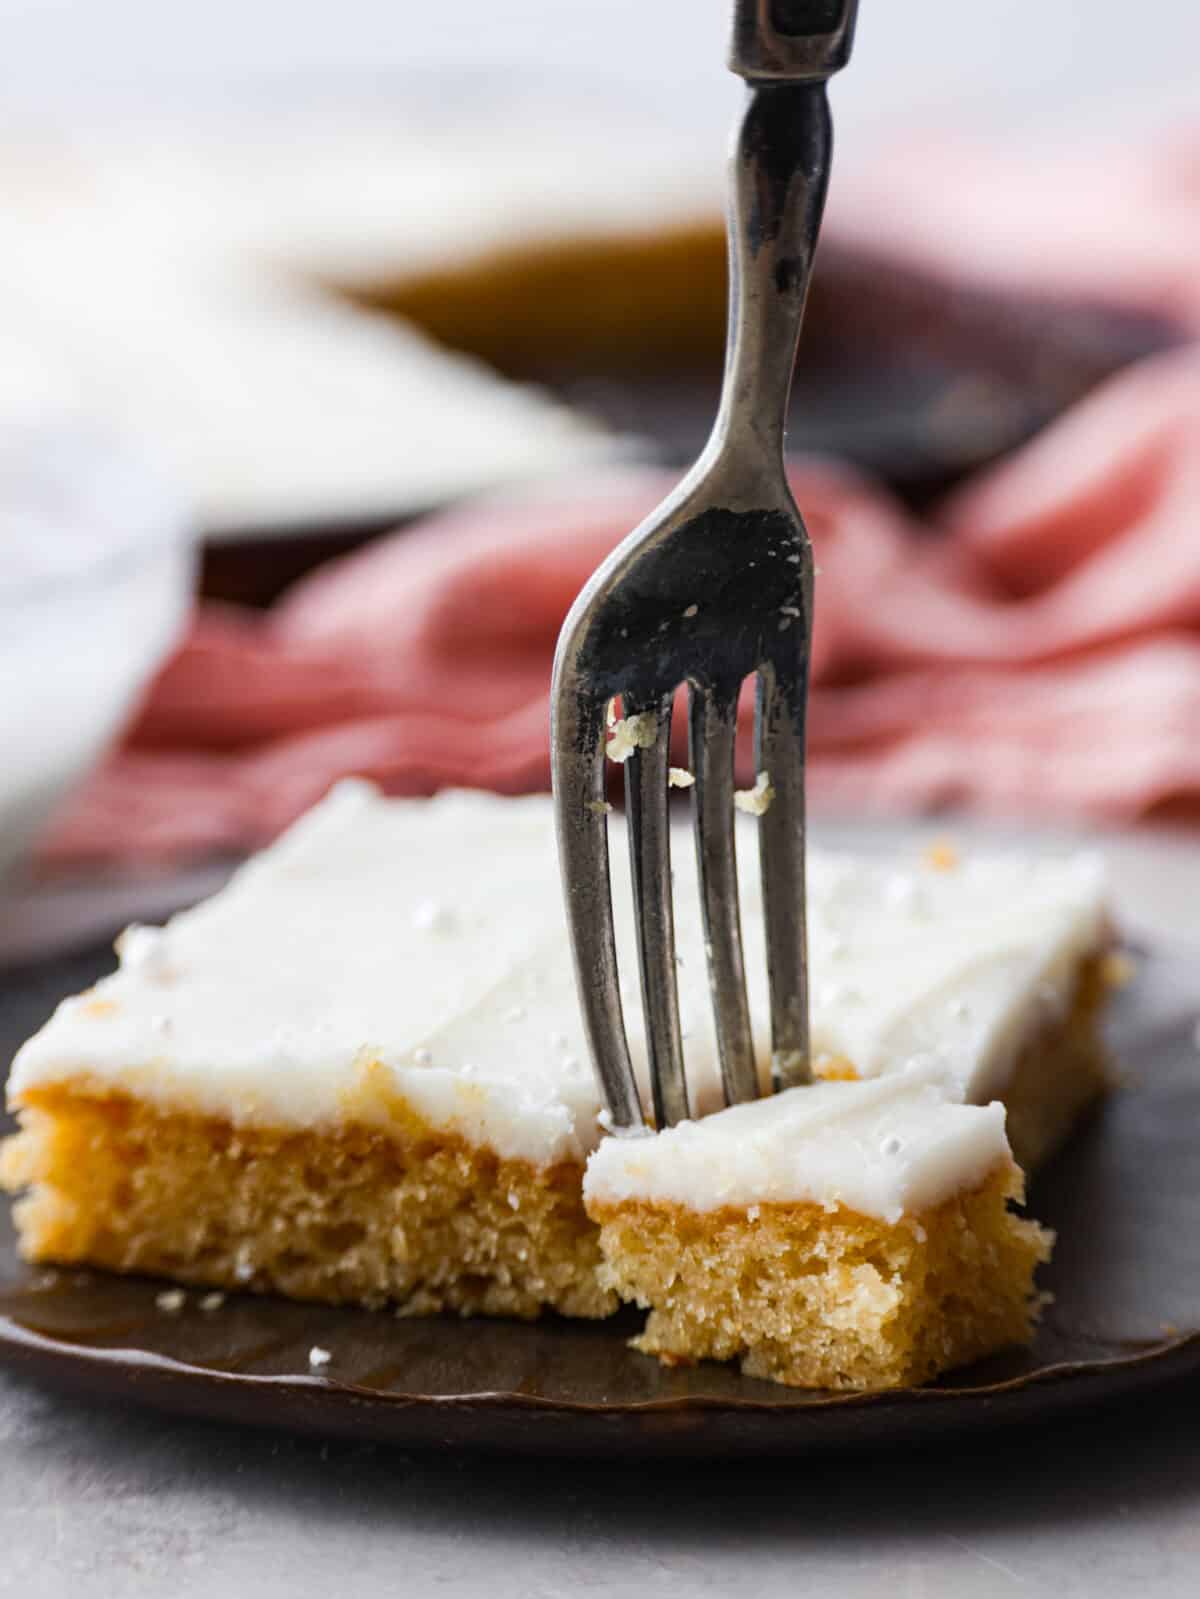 Closeup of a slice of cake, with a bite being taken out of it.